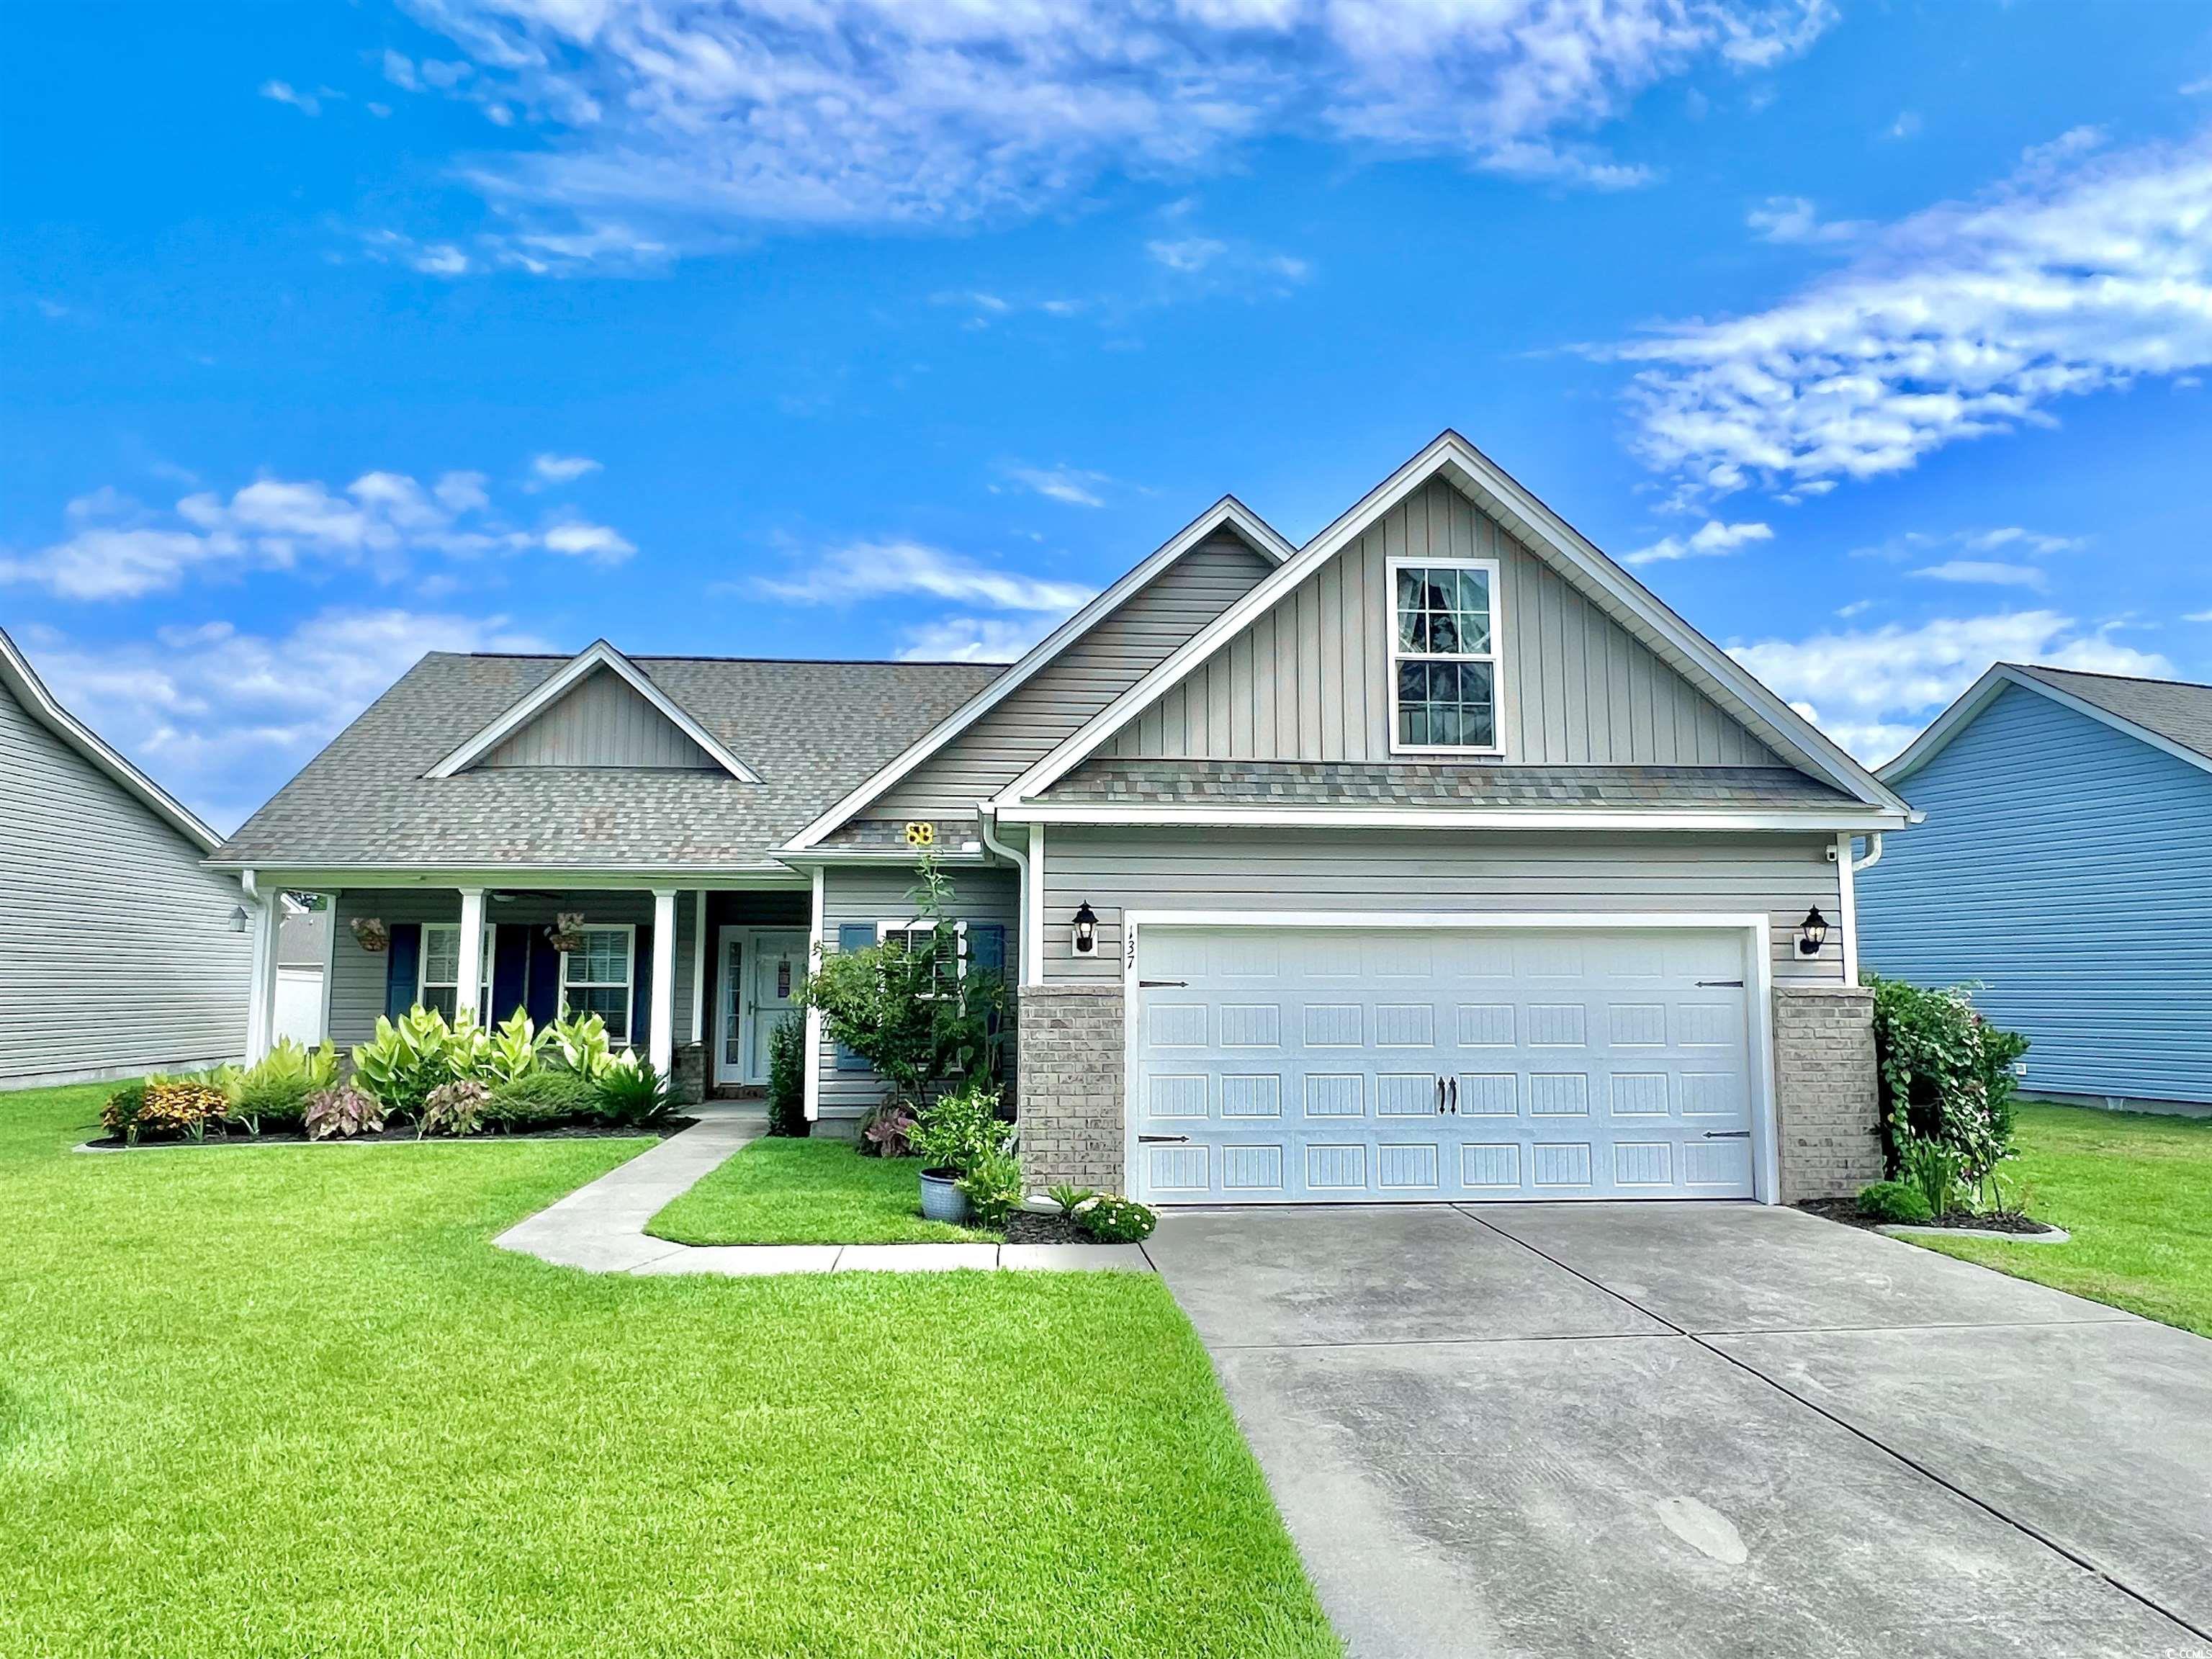 137 Yeomans Dr. Conway, SC 29526